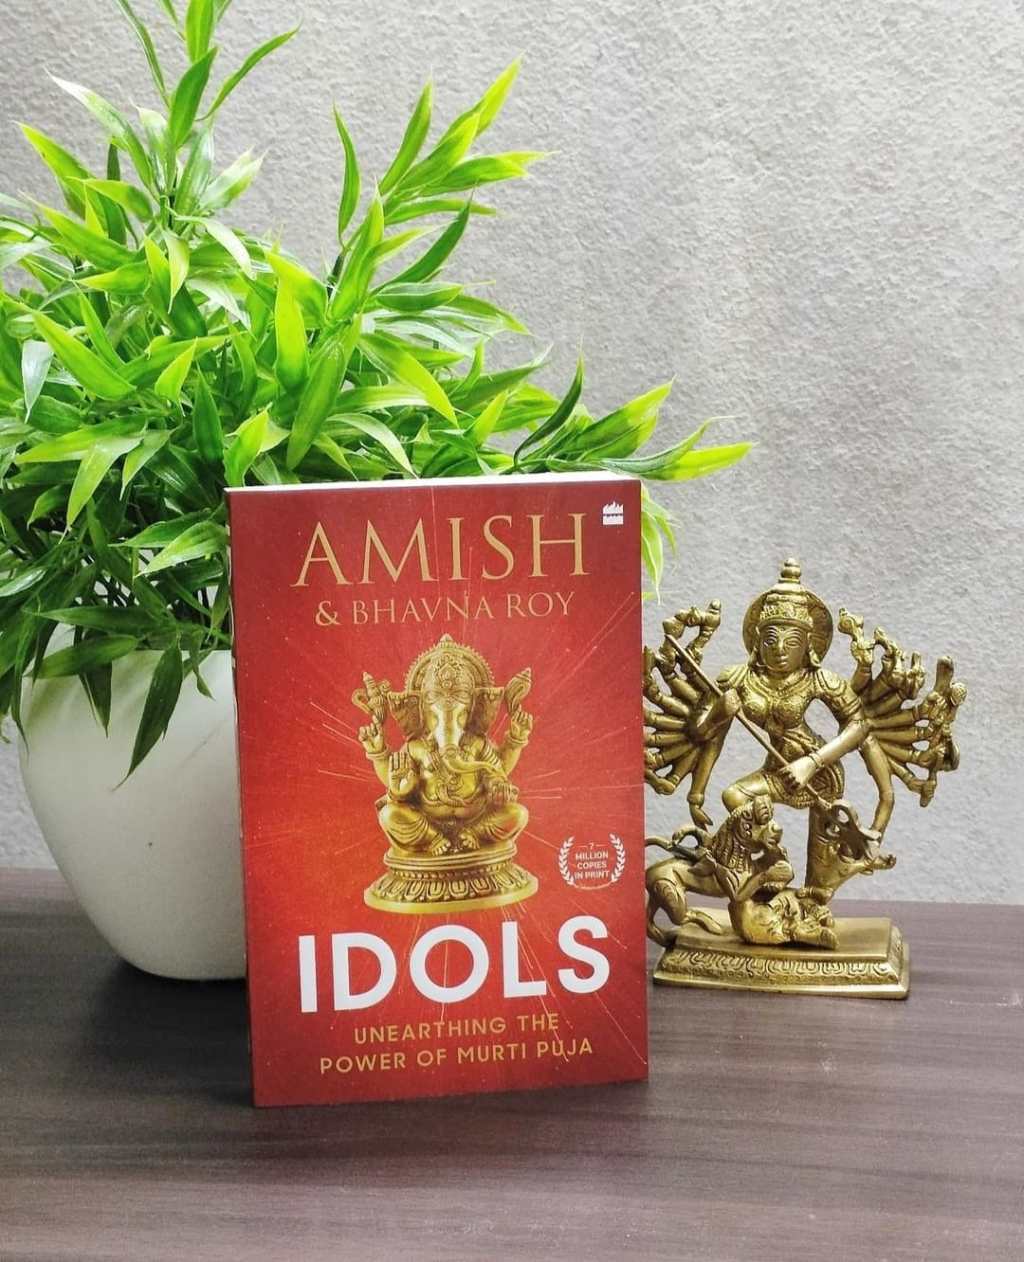 Are you interested in Philosophy of Religion from around the world? Then grab this book: Idols by Amish Tripathi and Bhavna Roy – Book Review